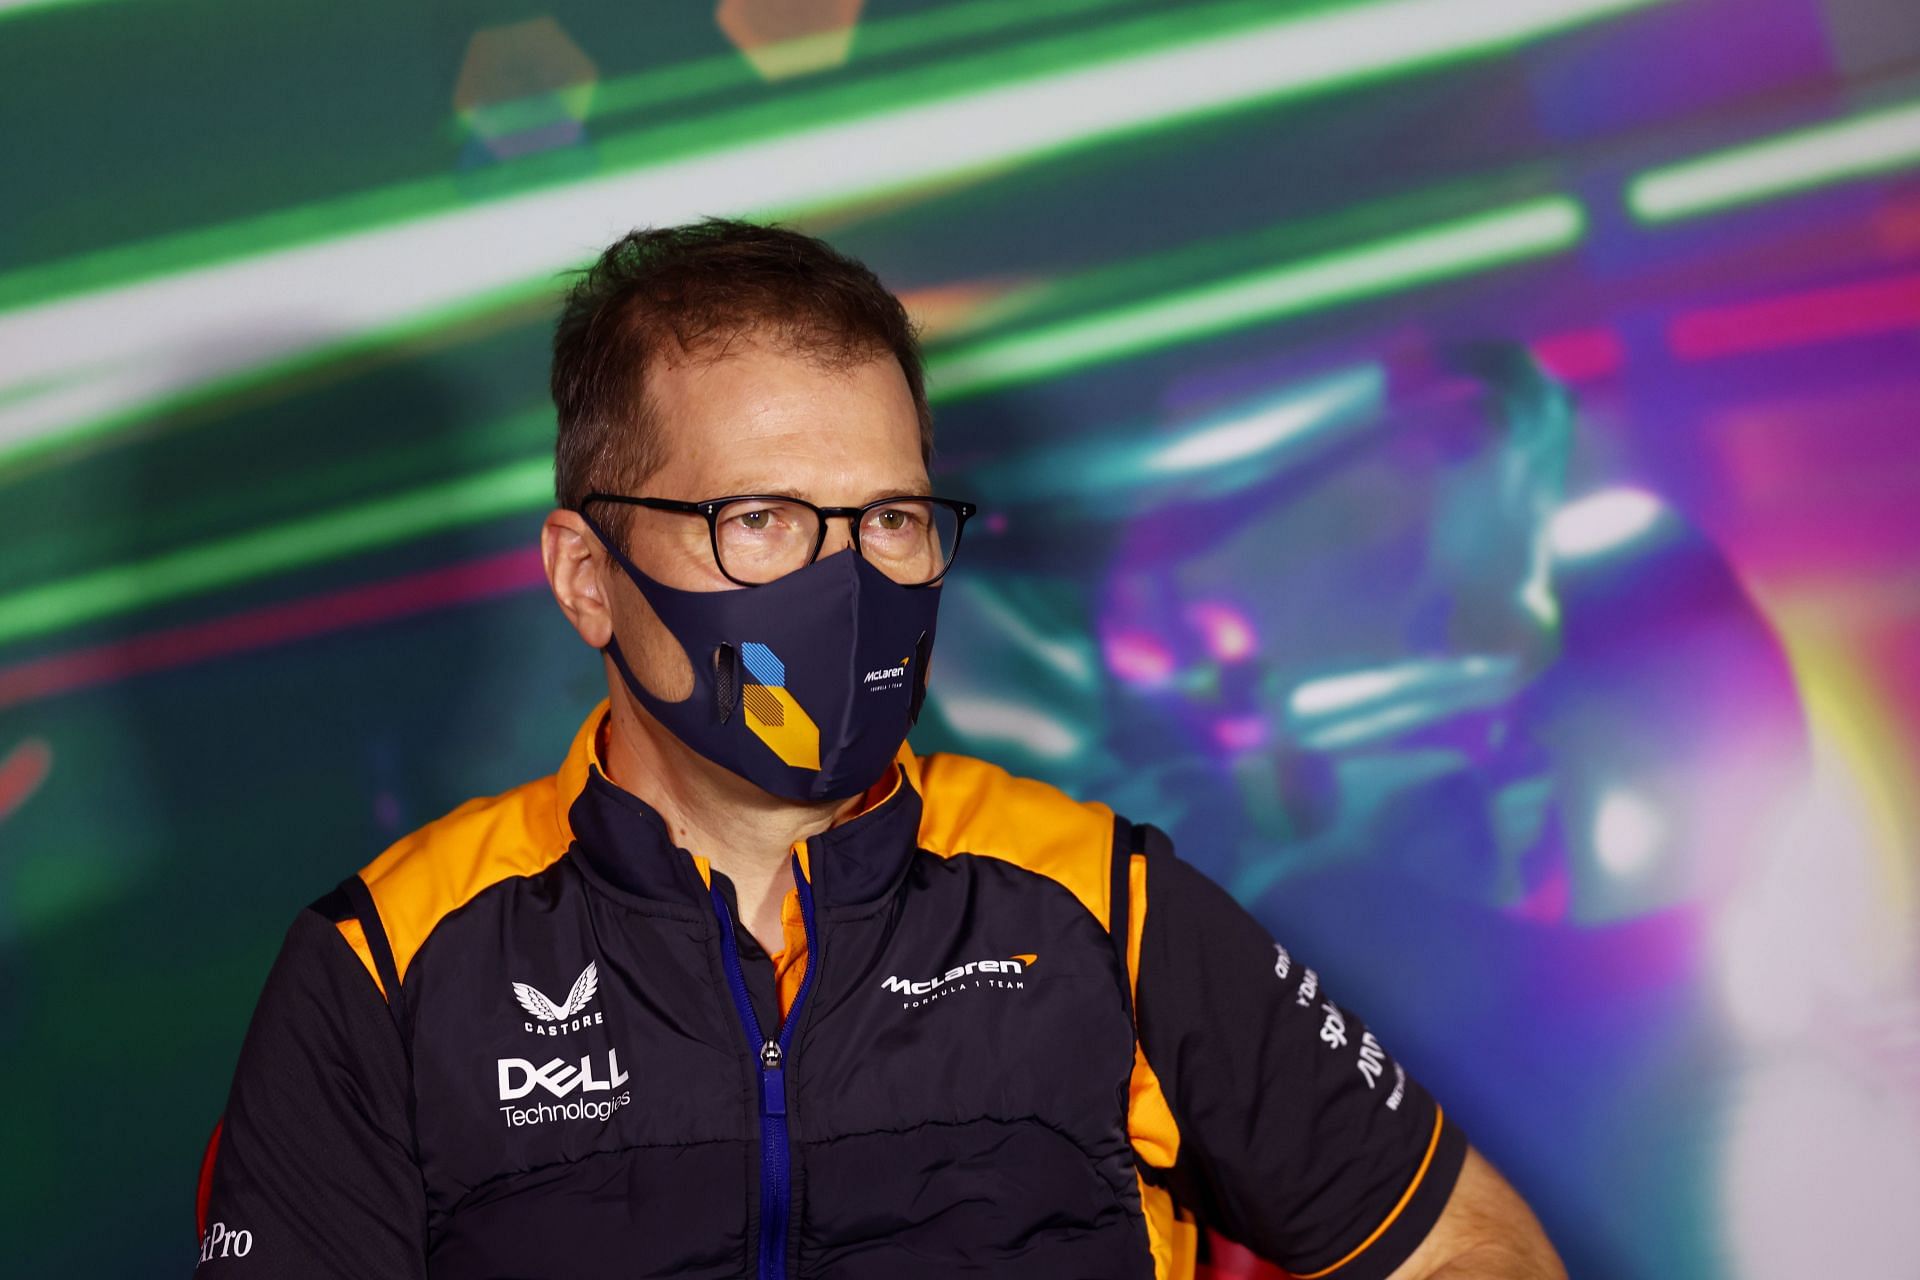 McLaren team principal Andreas Seidl during the 2022 F1 Saudi Arabian GP pre-race press conference (Photo by Lars Baron/Getty Images)